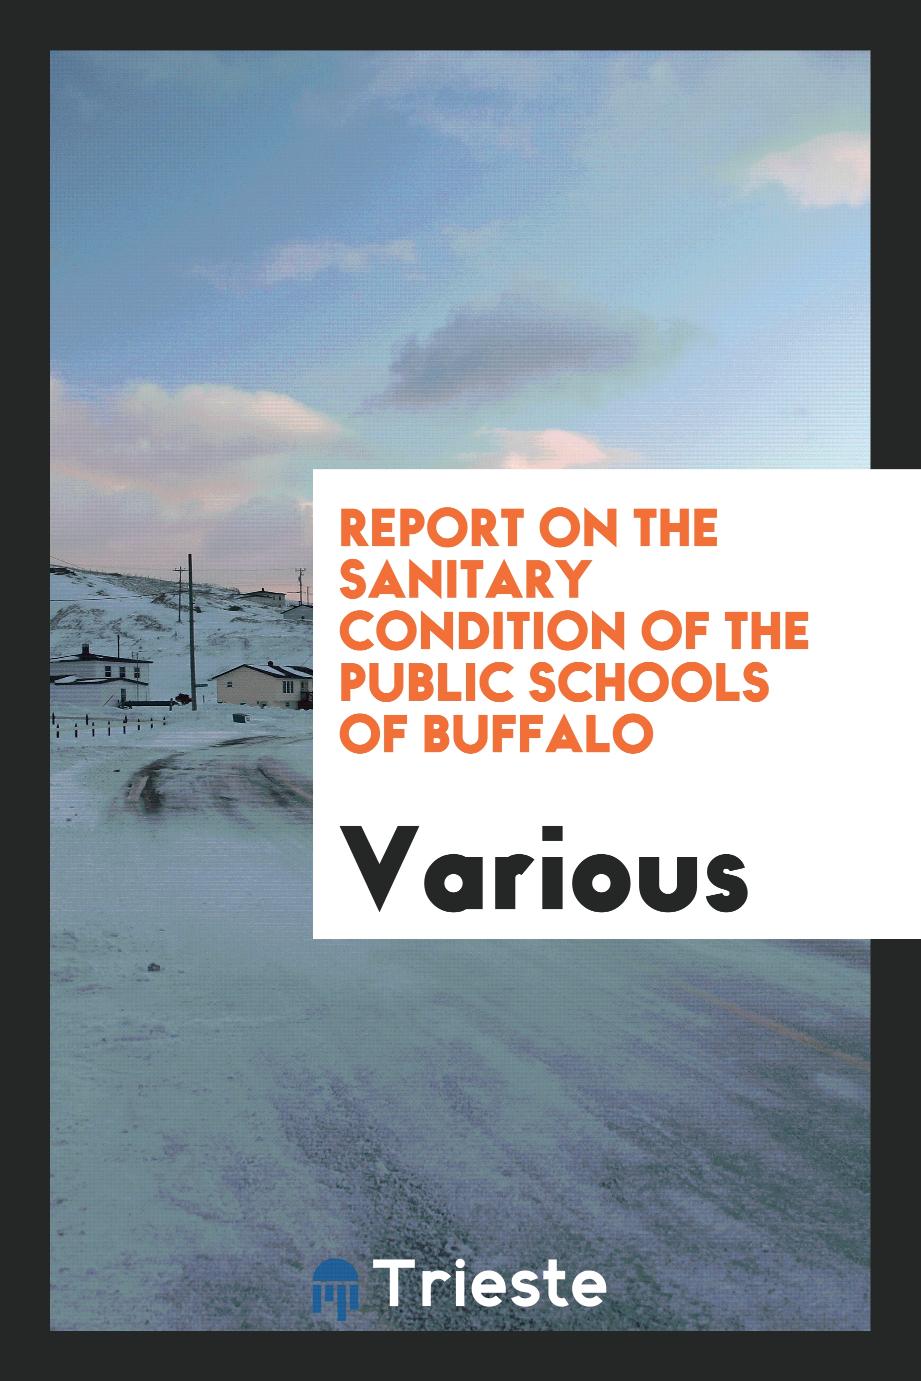 Report on the Sanitary Condition of the Public Schools of Buffalo